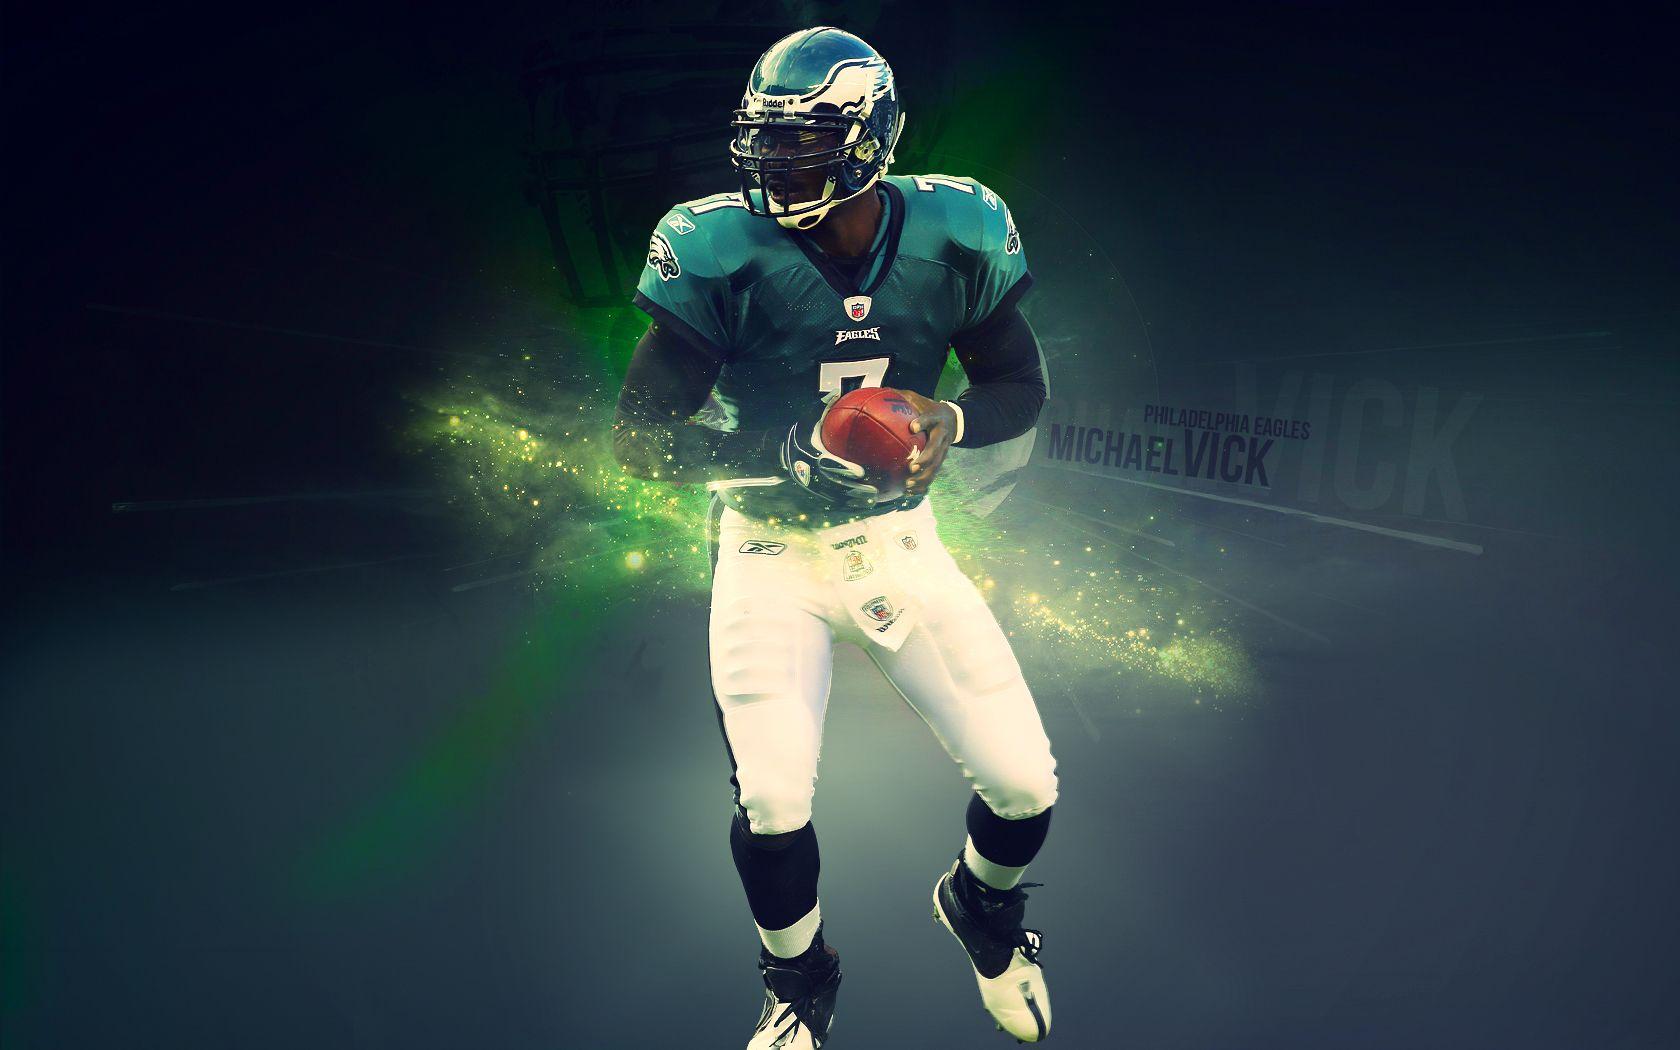 Michael Vick Photo by Modesty Jammes on Gold